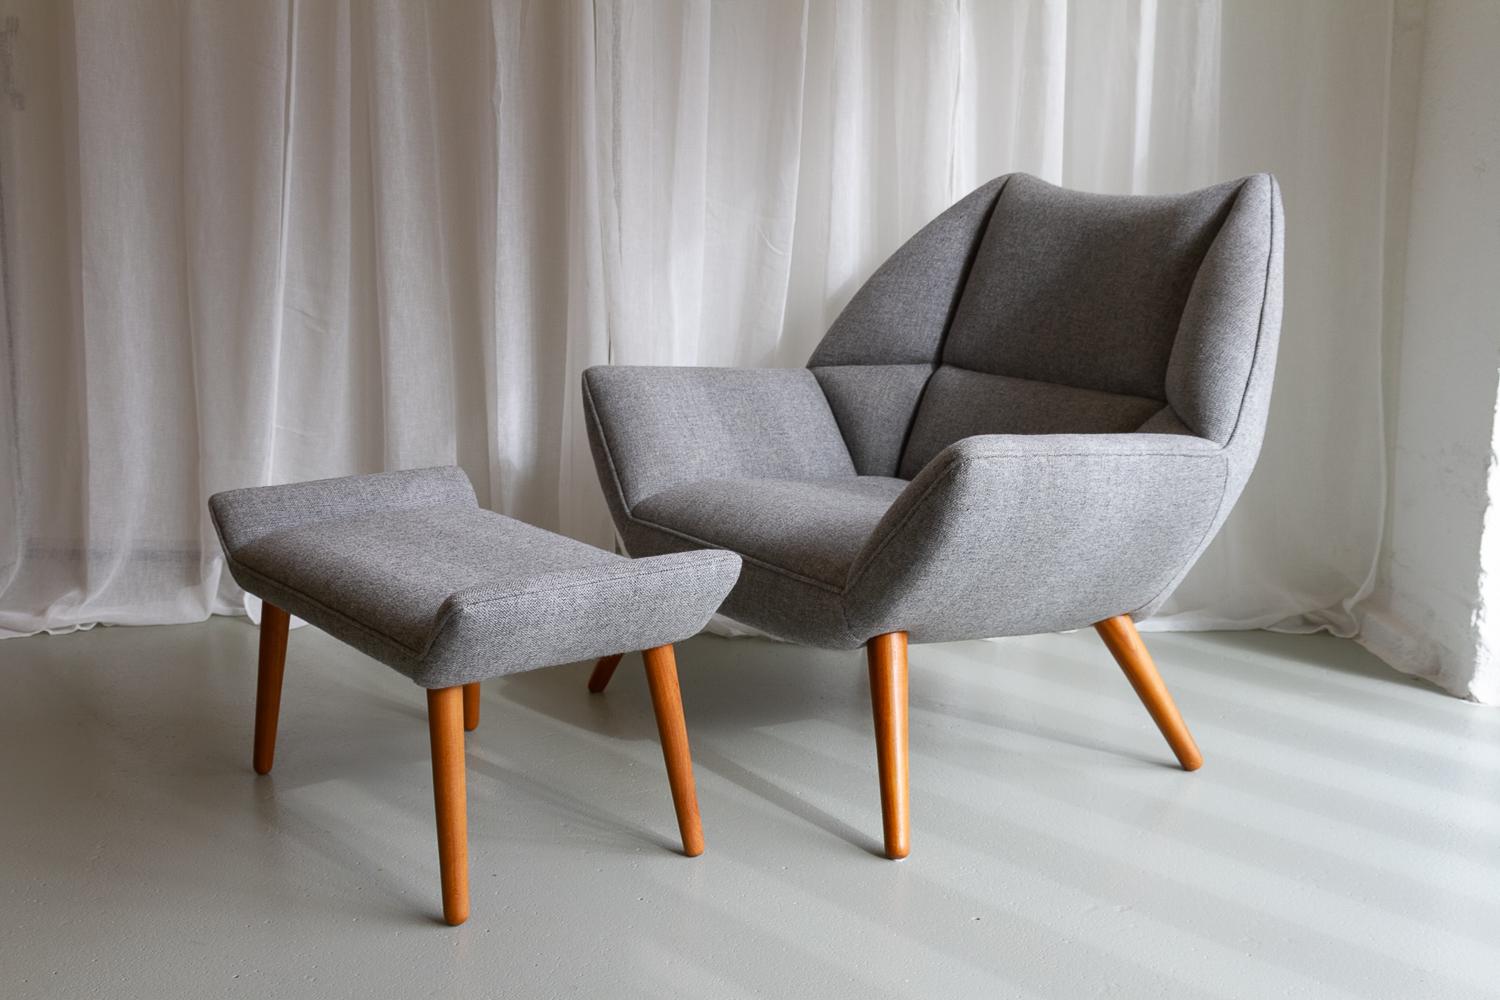 Danish Modern Easy Chair and Stool Model 12 by Kurt Østervig, 2010s.
Lounge chair and footstool in grey wool with round tapered teak leg designed in 1961 by Kurt Østervig for Schillers Polstermøbelfabrik, Denmark. 
This is a part of a limited series